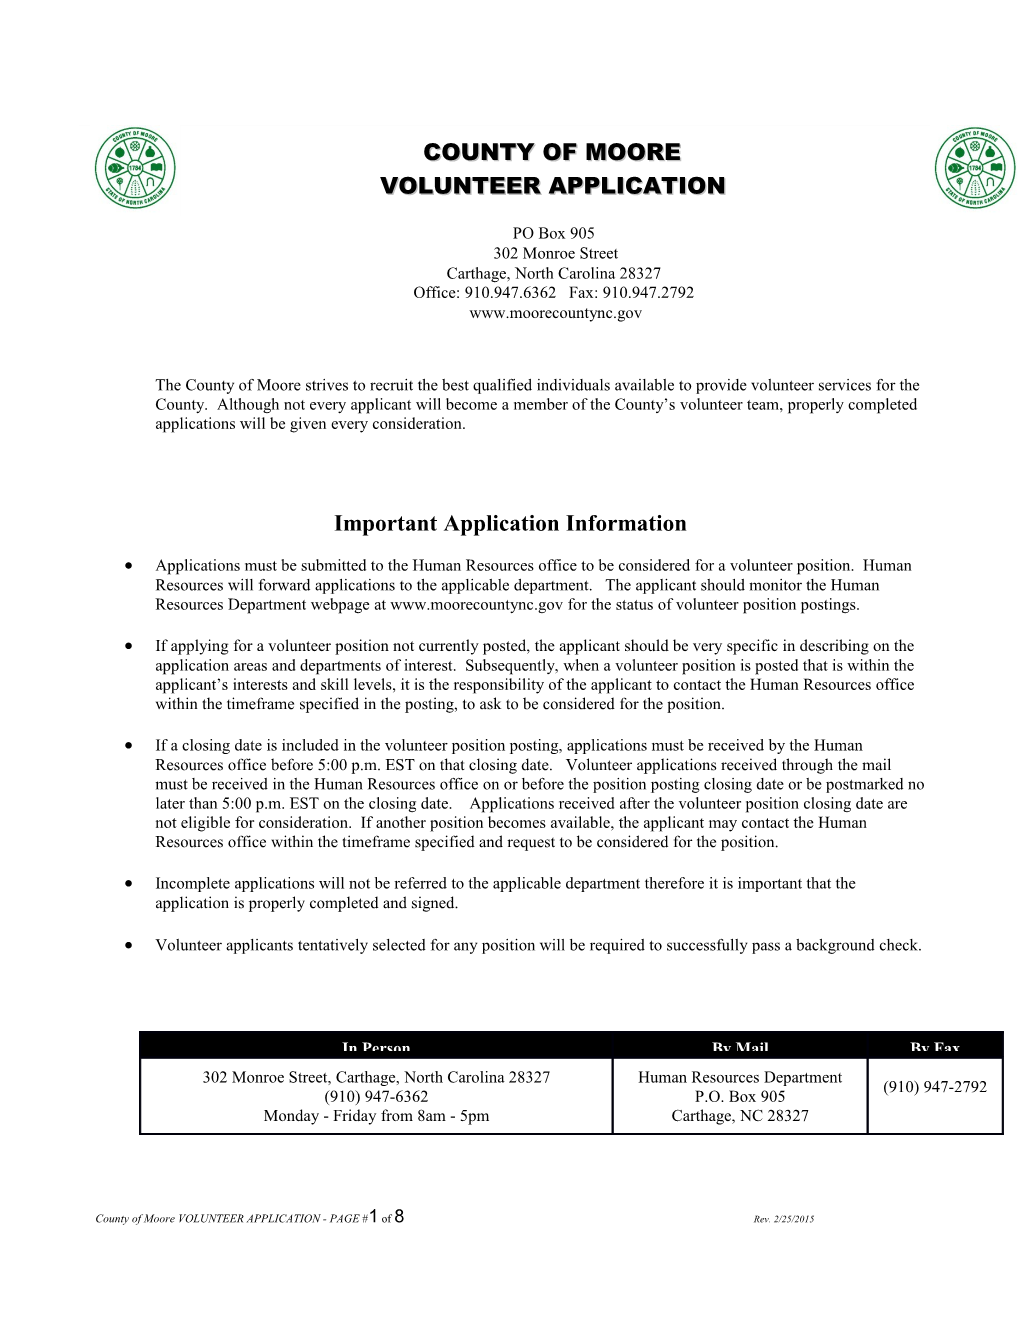 County of Moore Employment Application